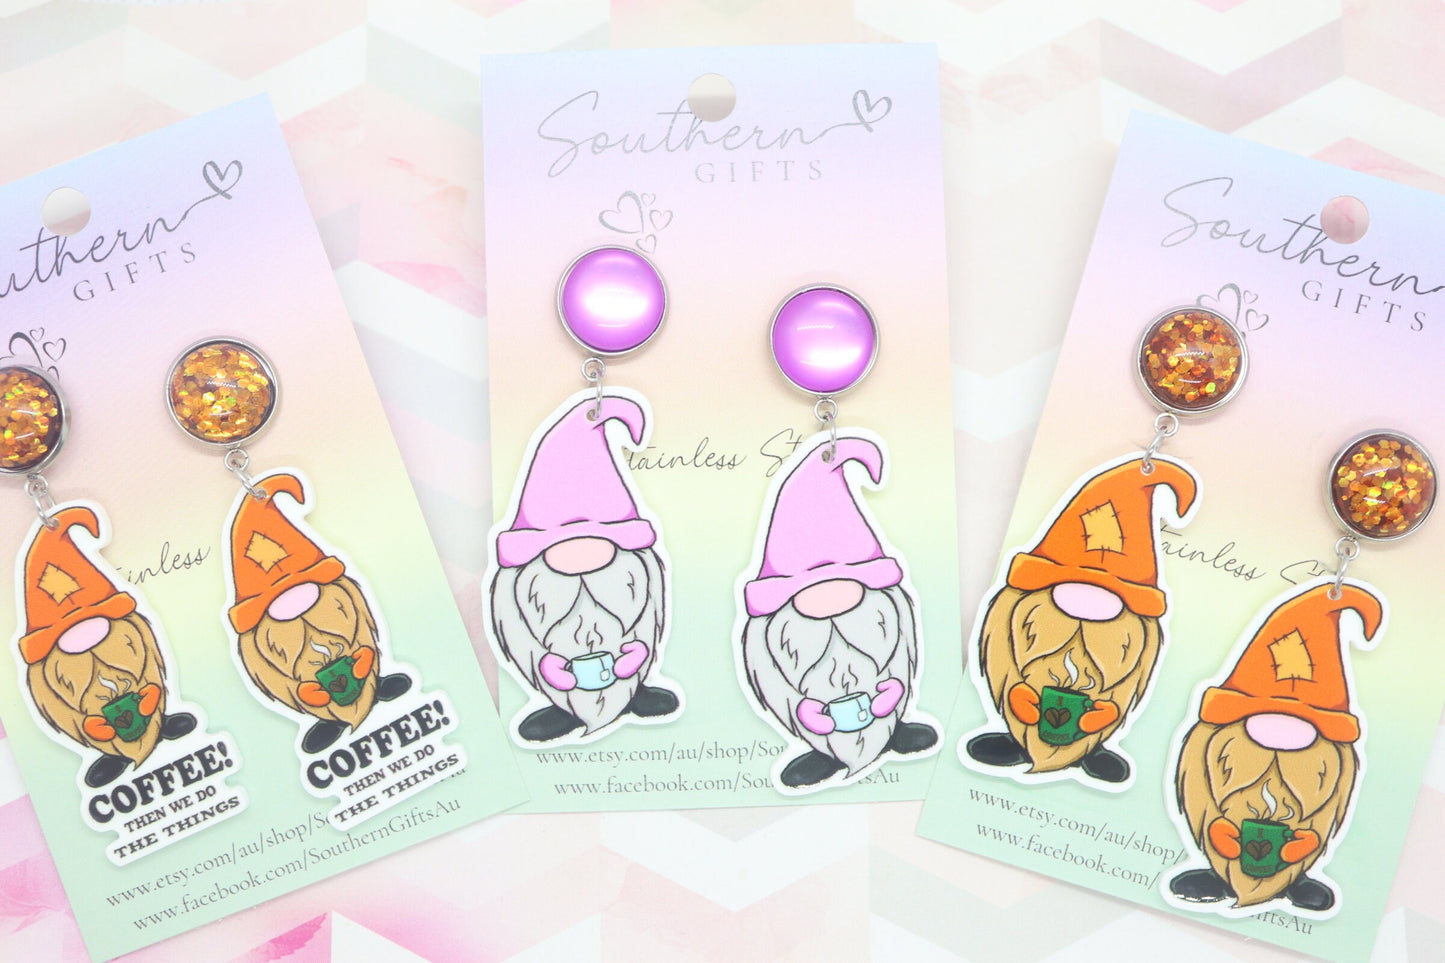 Standard Coffee and Tea Gnomes Statement Earrings